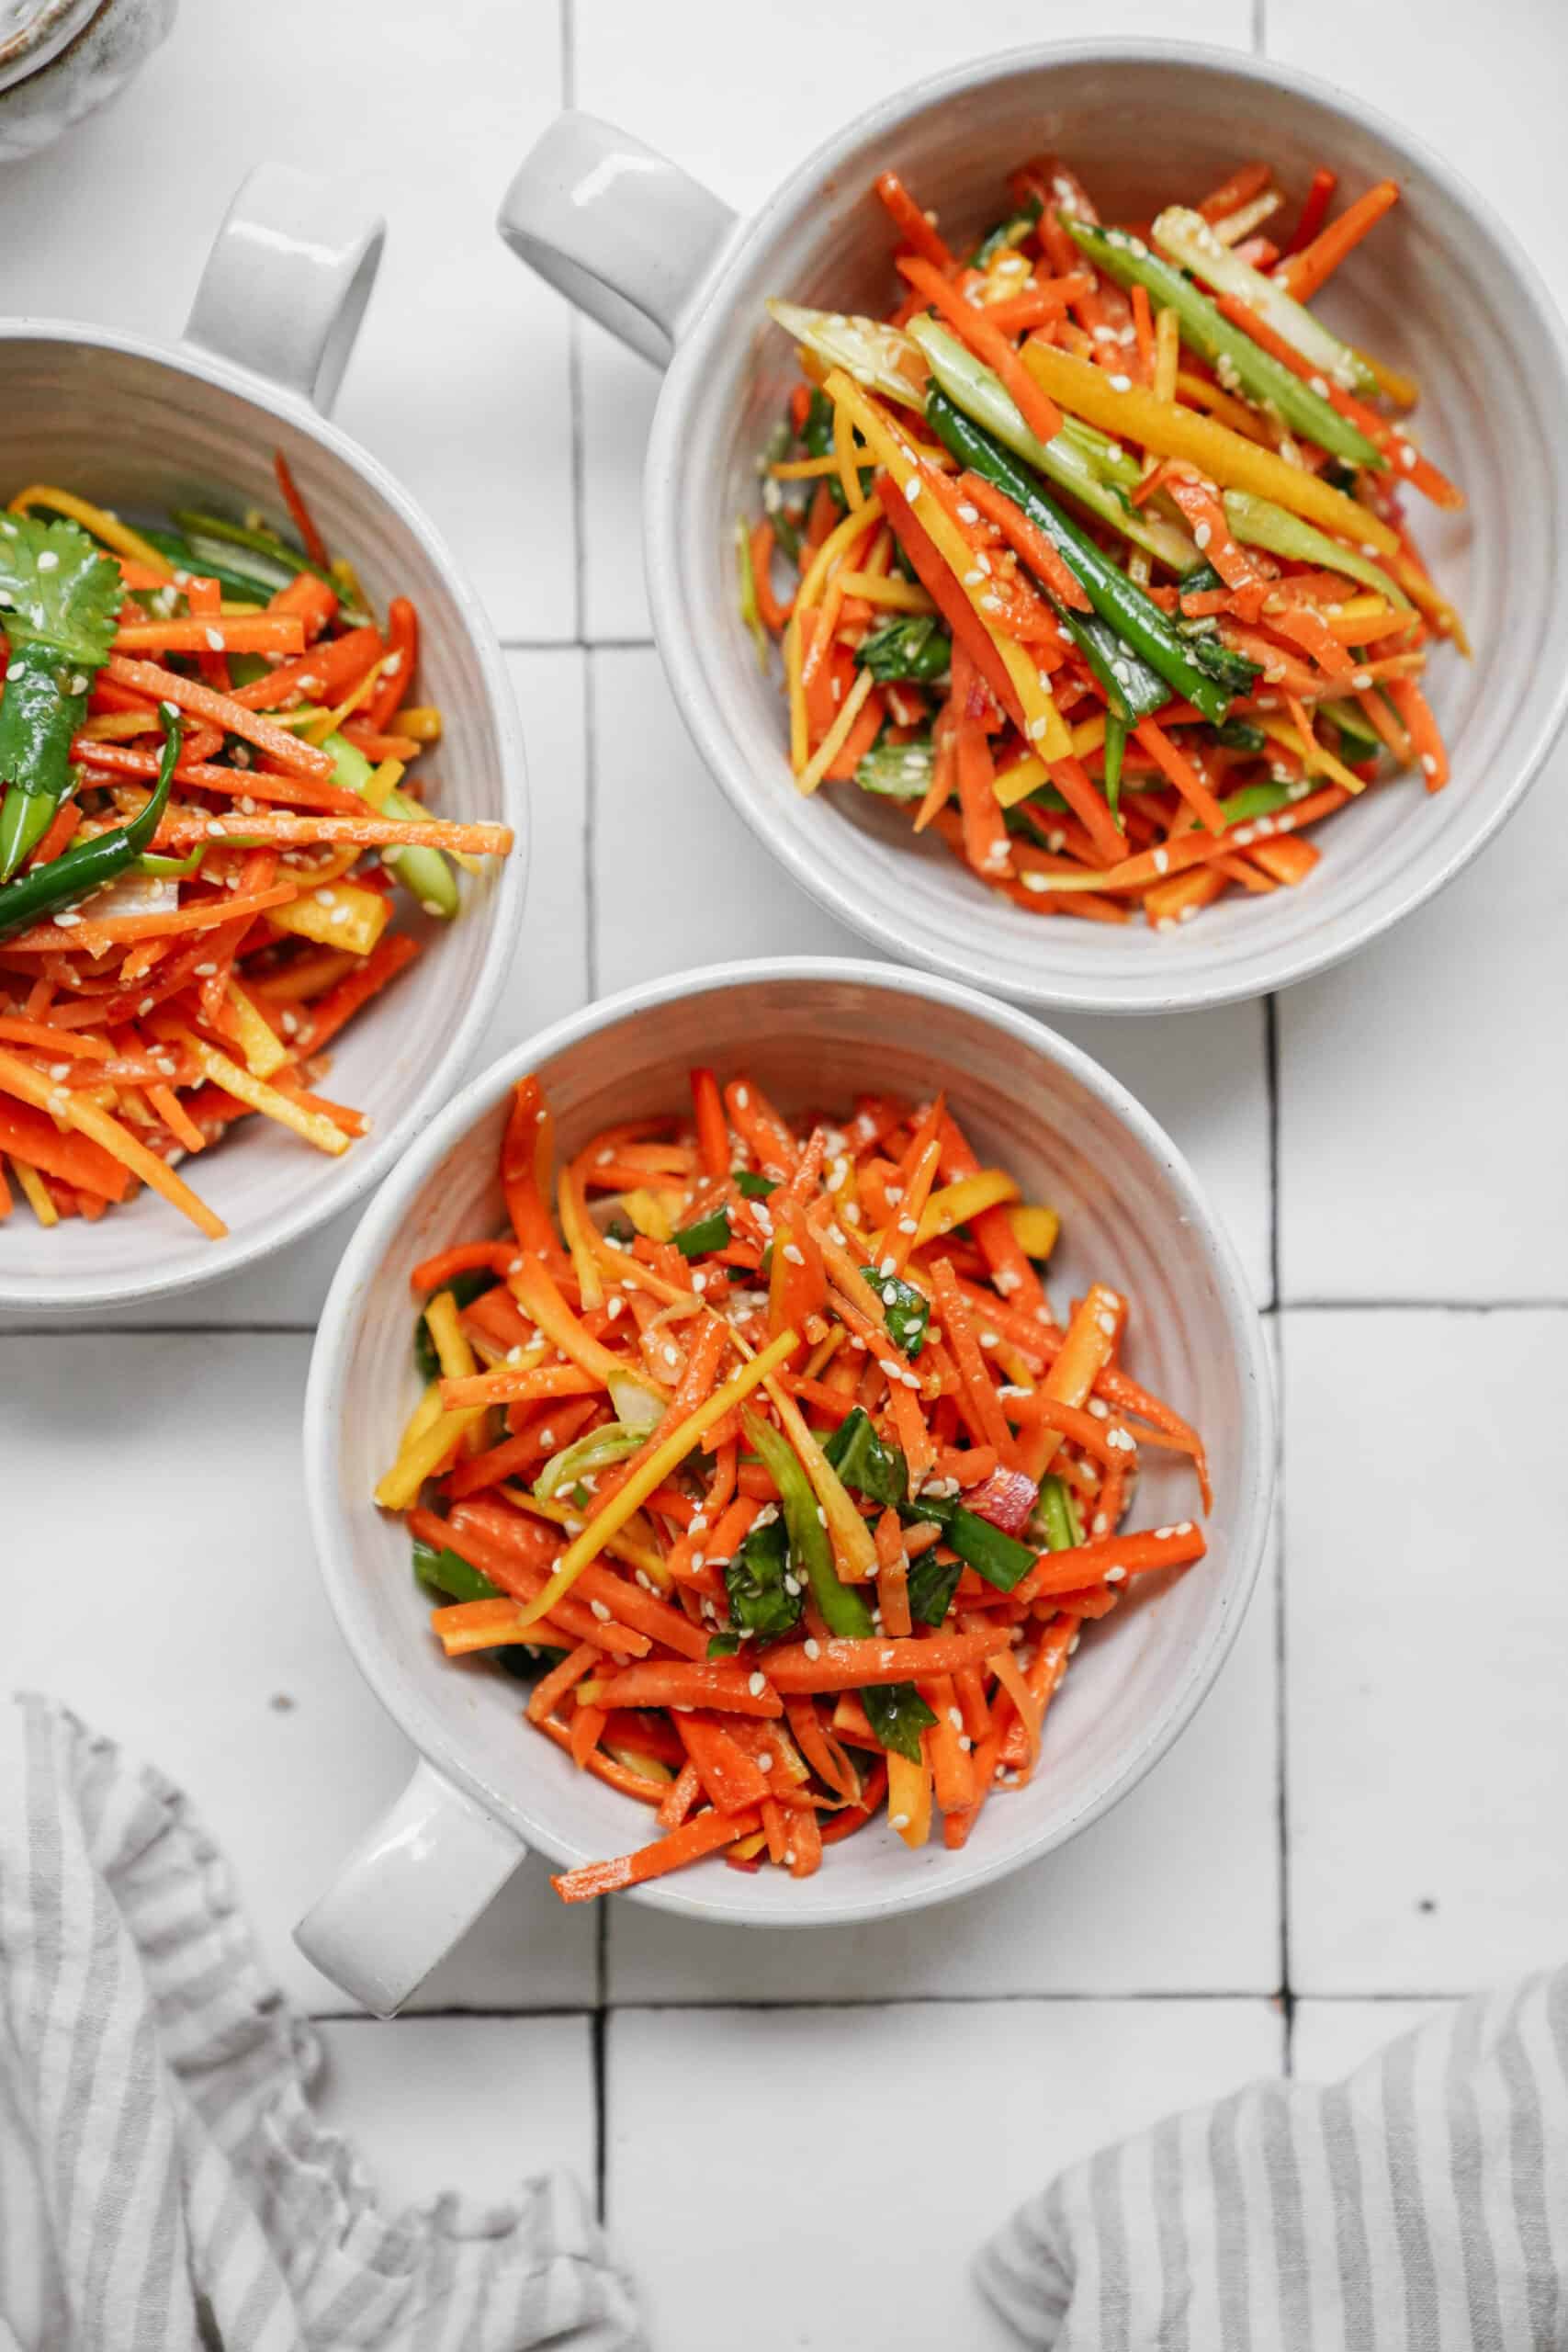 Fresh carrot salad in white bowls on a counter